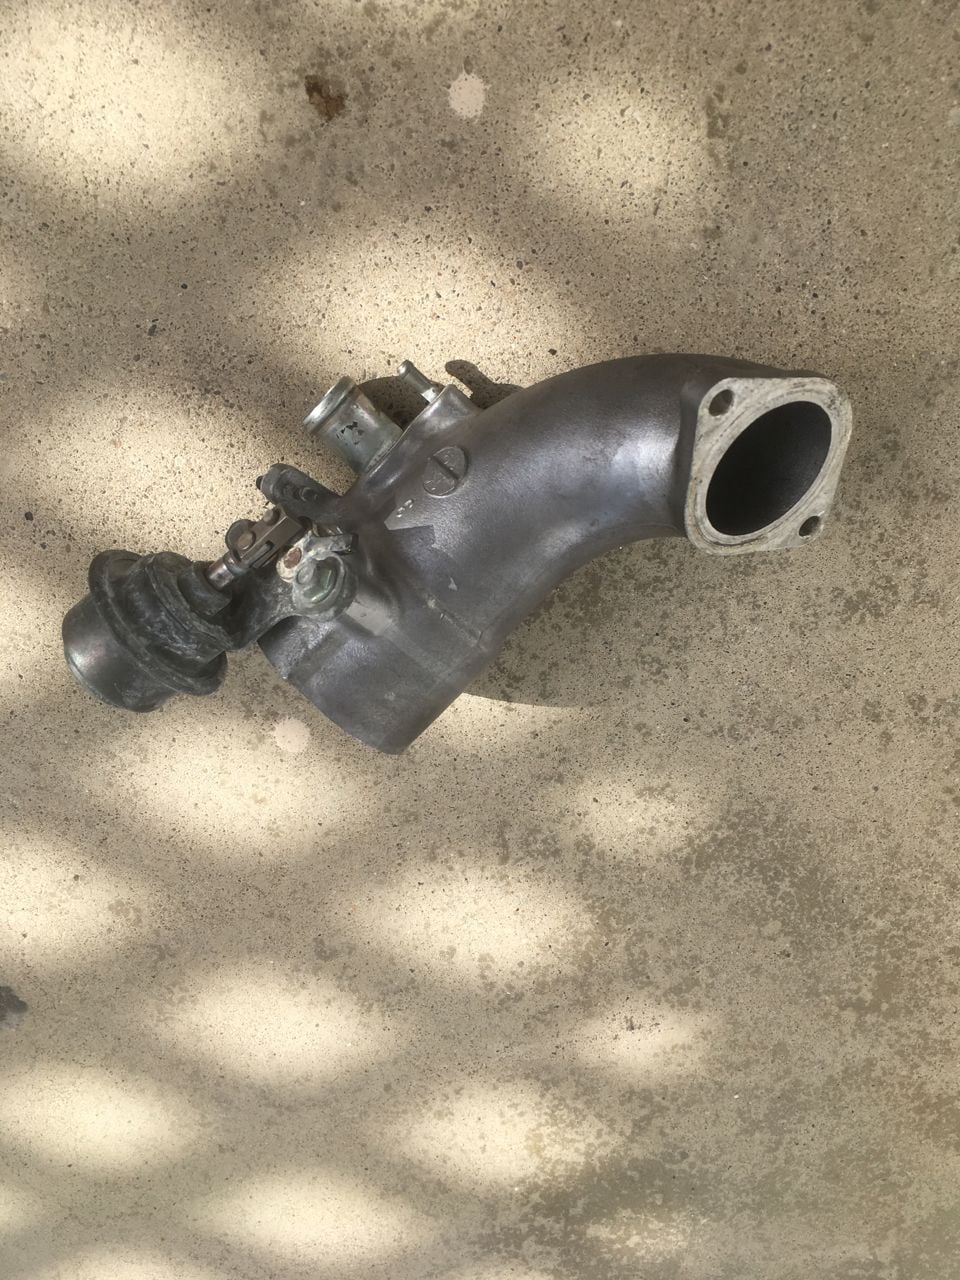 1993 Mazda RX-7 - charge control valve and Y-pipe elbow - Engine - Intake/Fuel - $20 - Seal Beach, CA 90740, United States